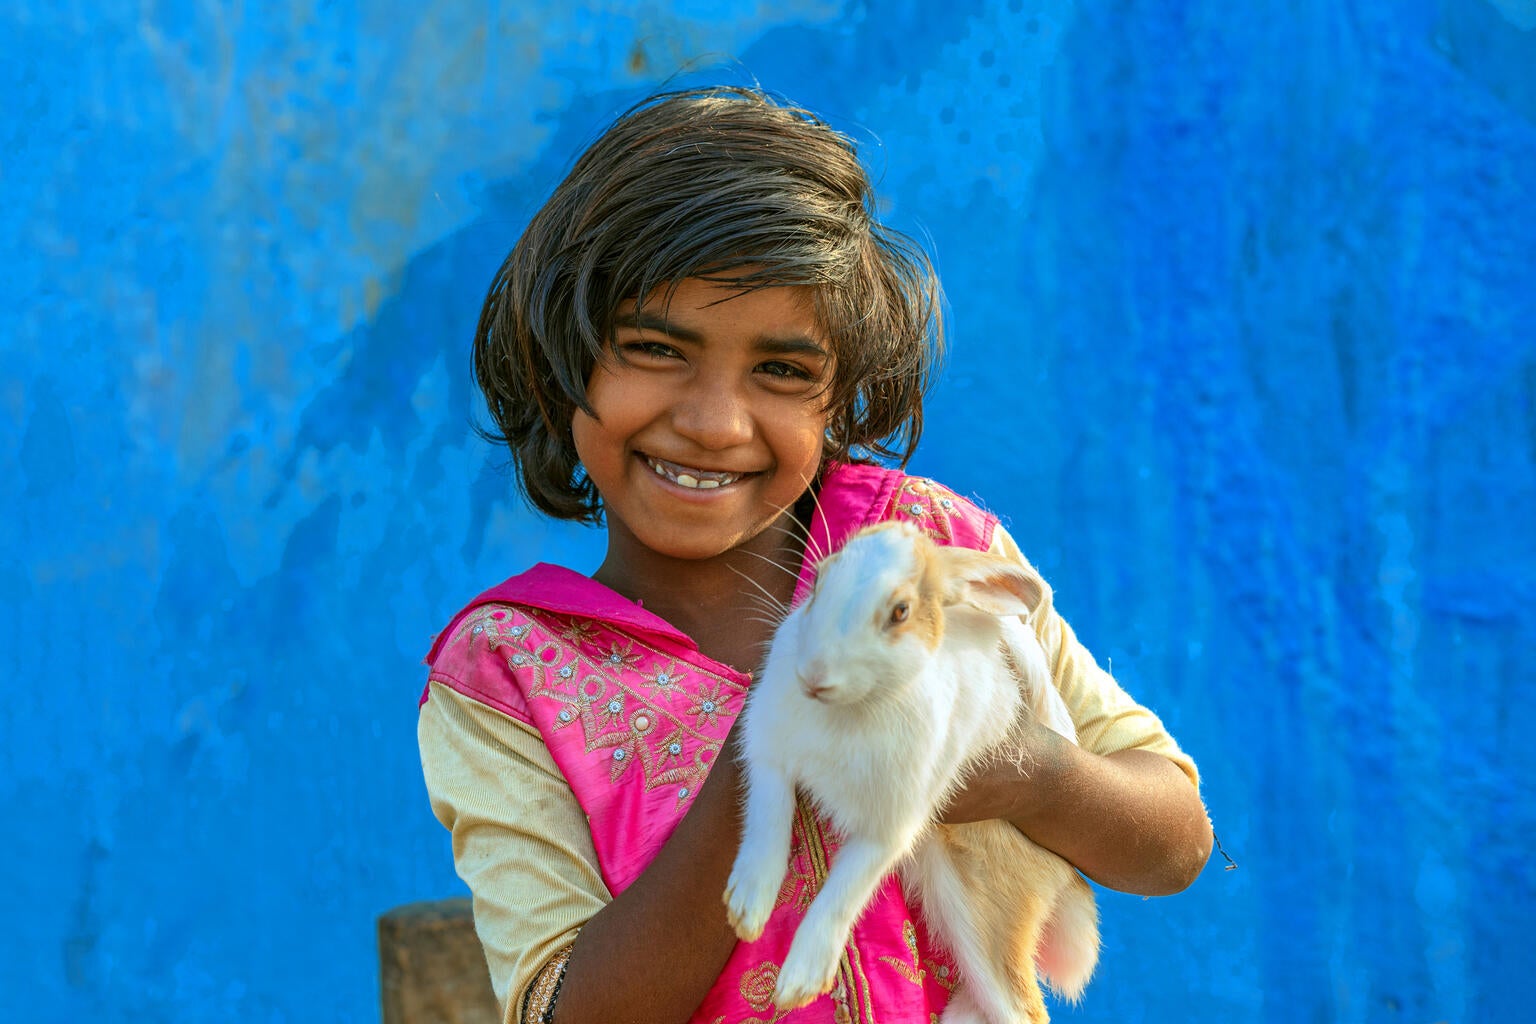 A young girl is holding a rabbit and smiling